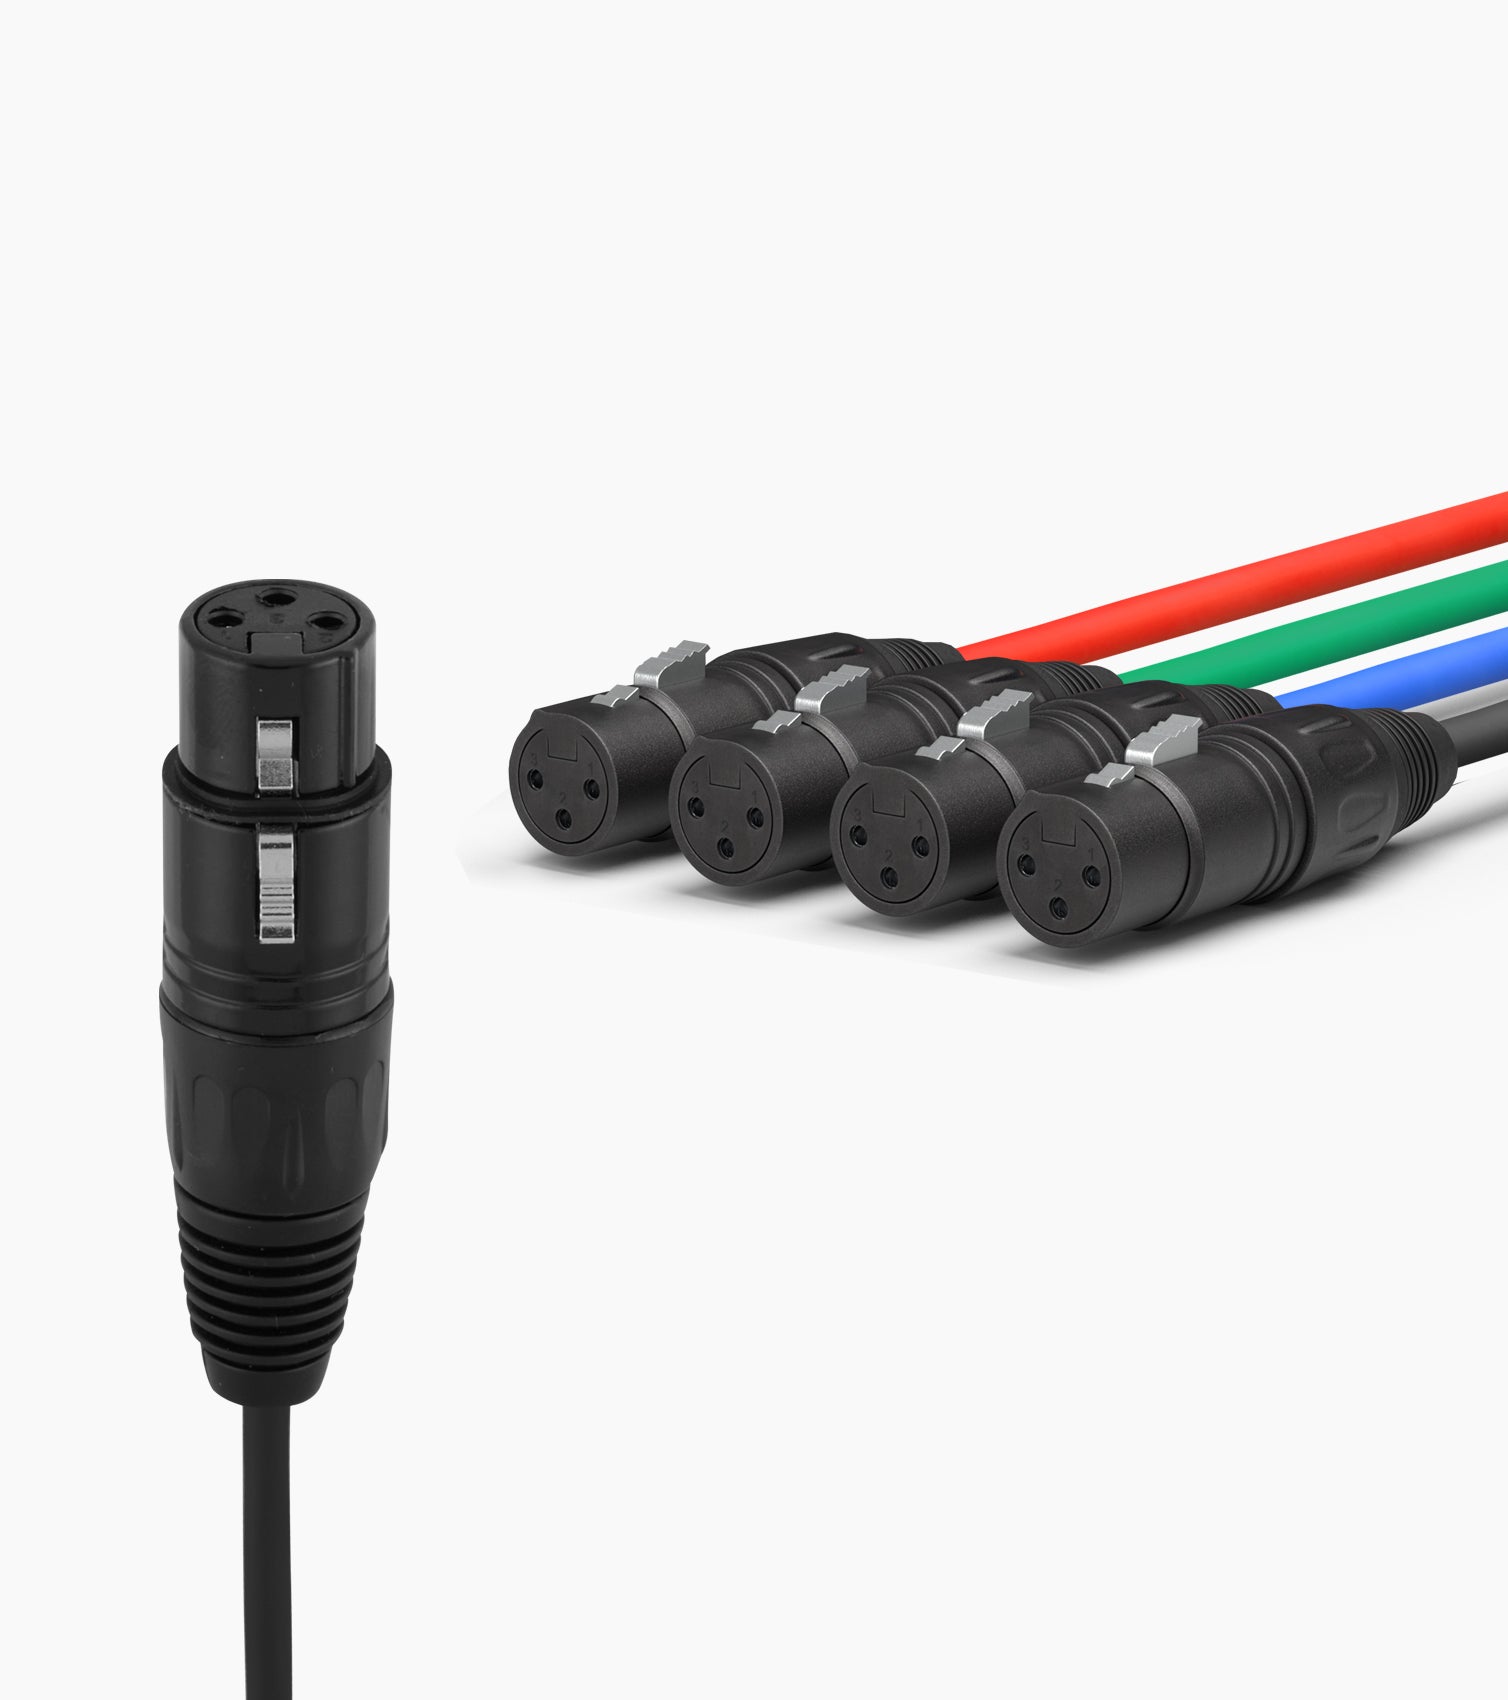 4-Channel Female to Male XLR to CAT6 Network Cable